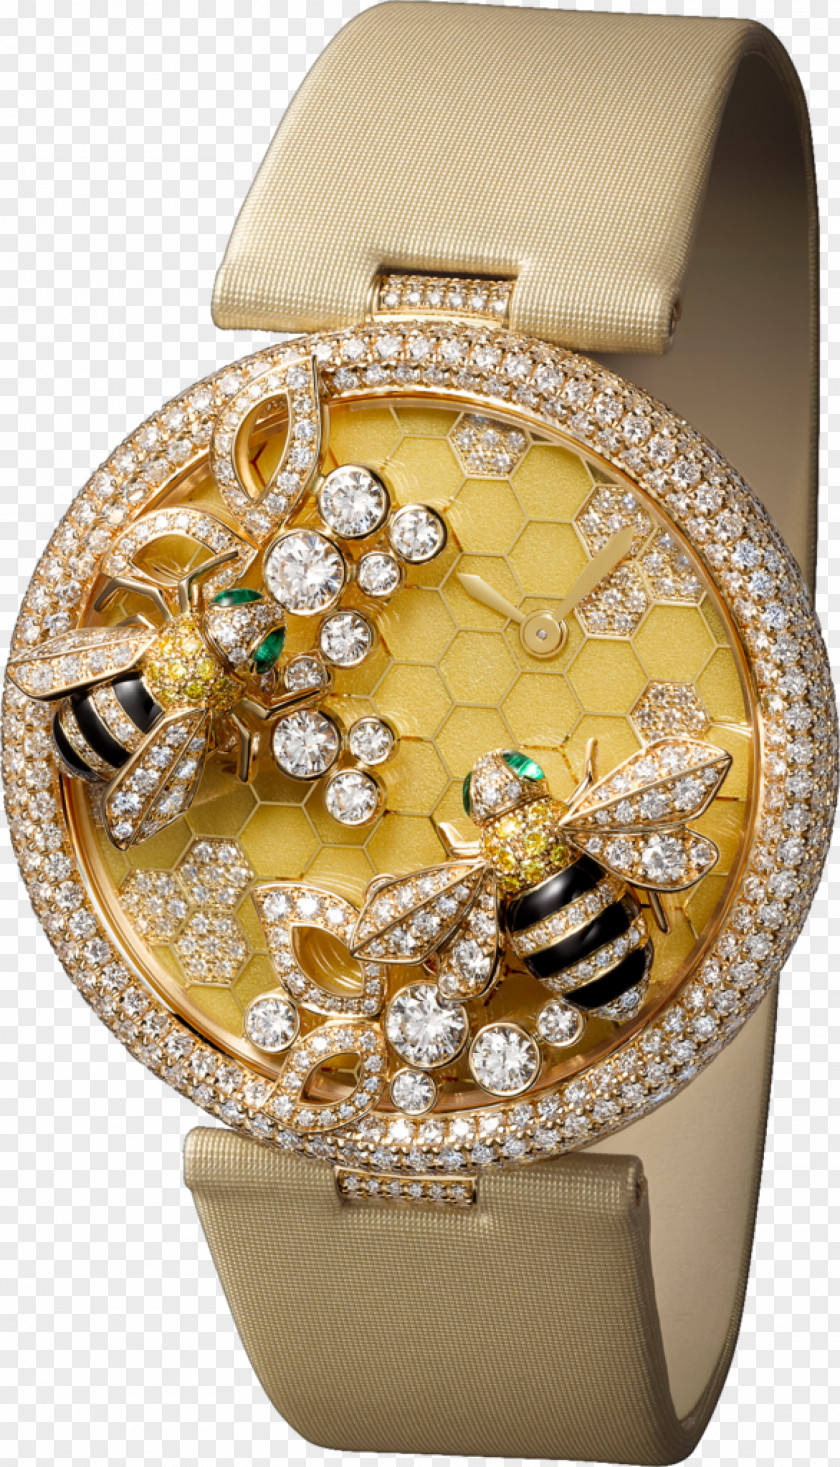 Jewellery Bling-bling Gold Clothing Accessories Watch PNG